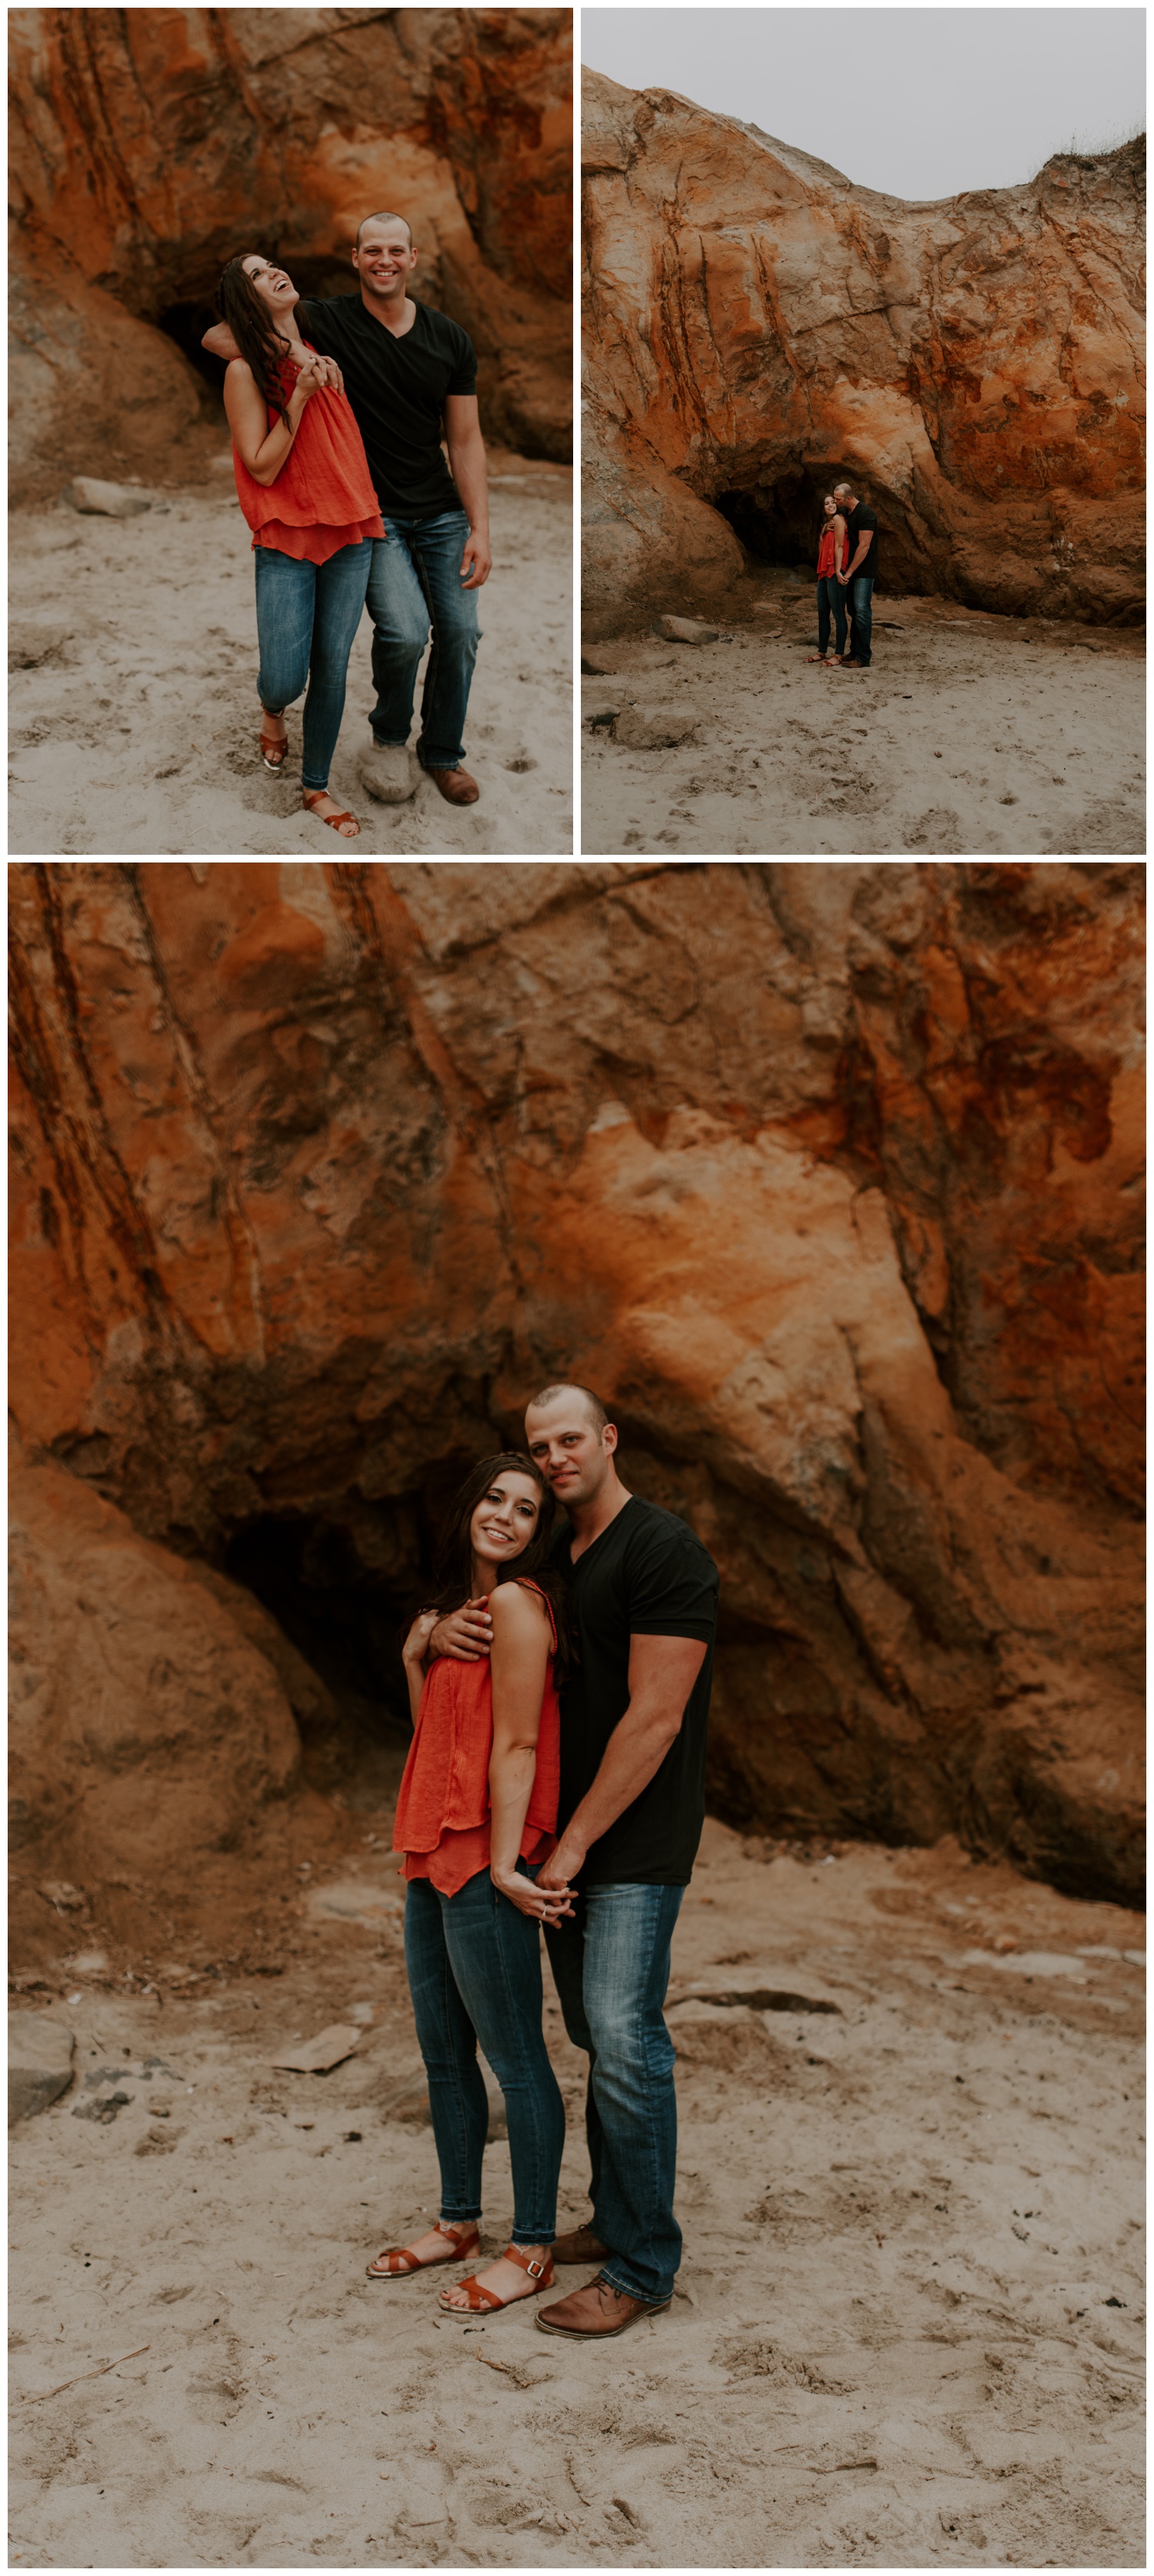 Haley and Robbie Engagements-79.jpg